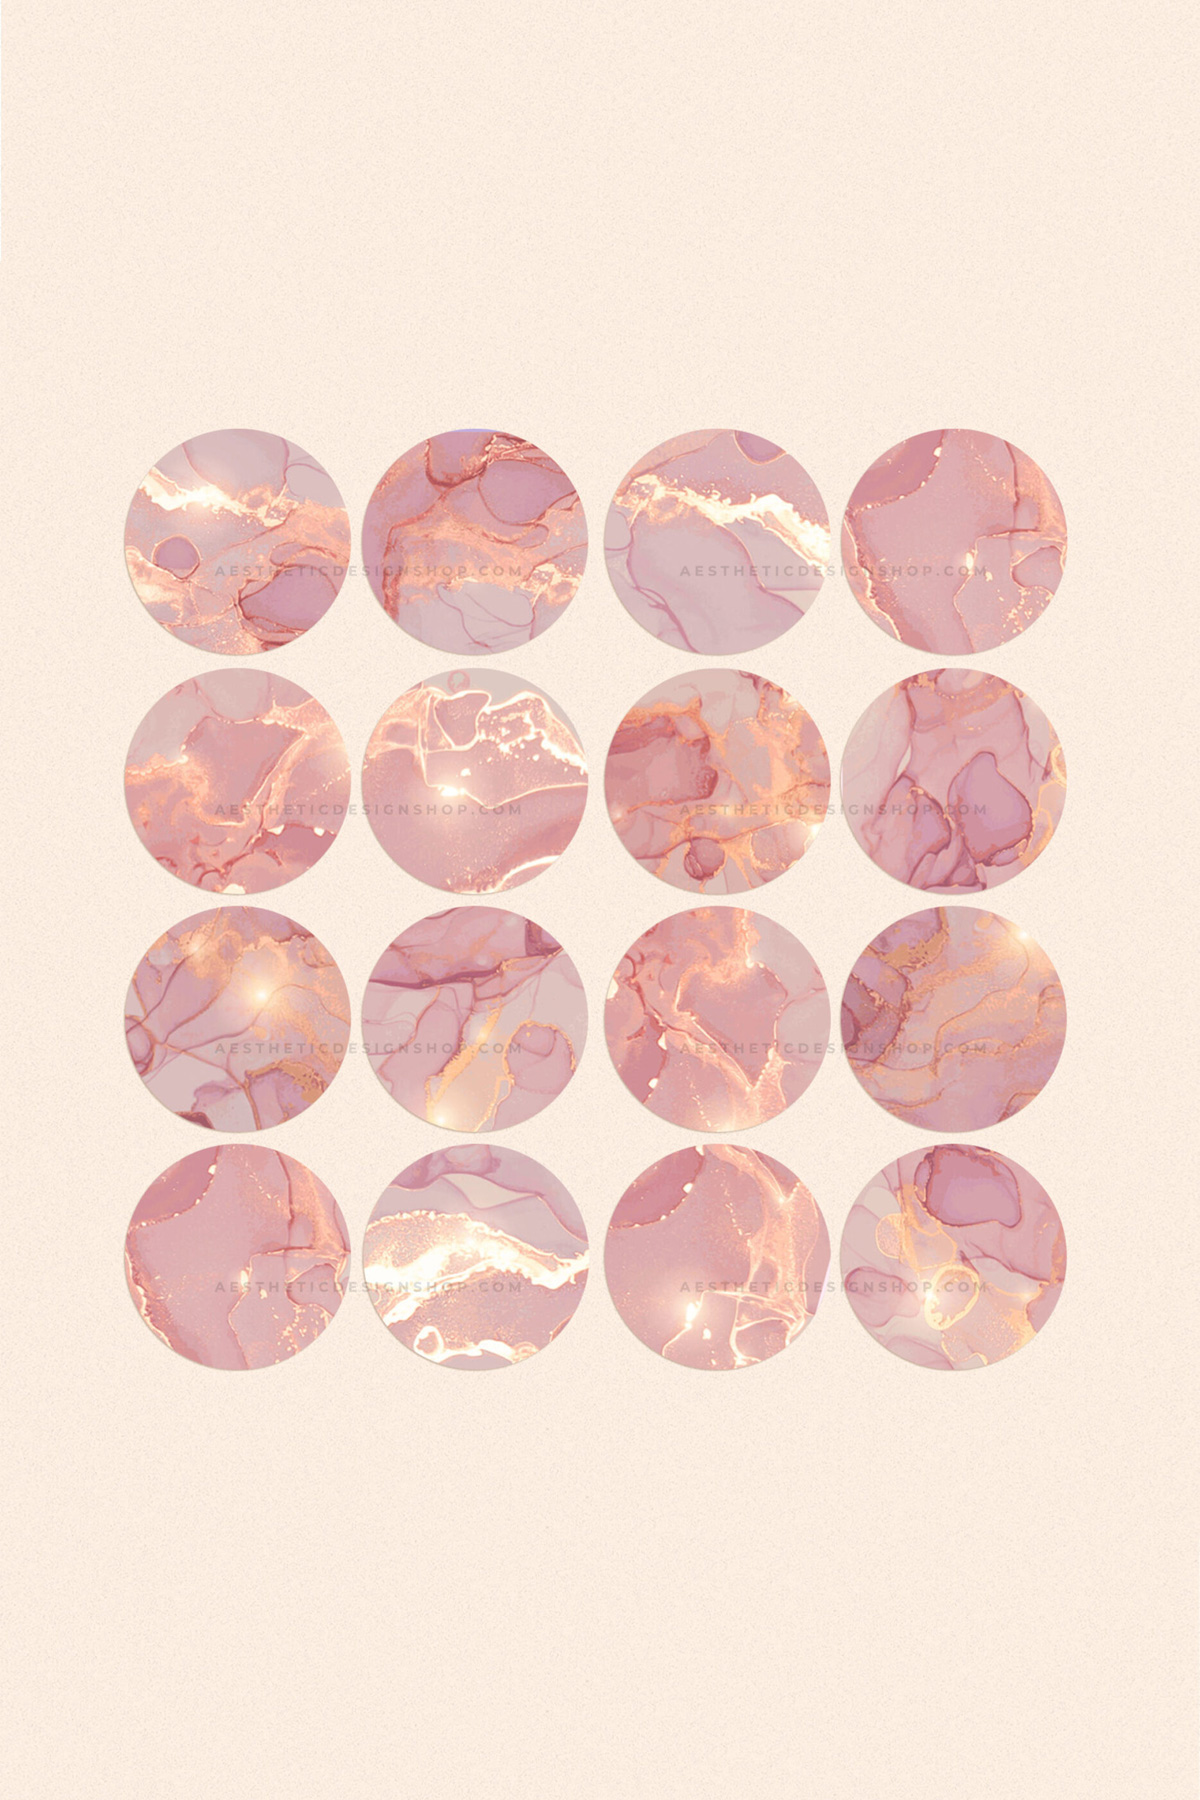 Pink marble Instagram Highlight Covers ⋆ The Aesthetic Shop